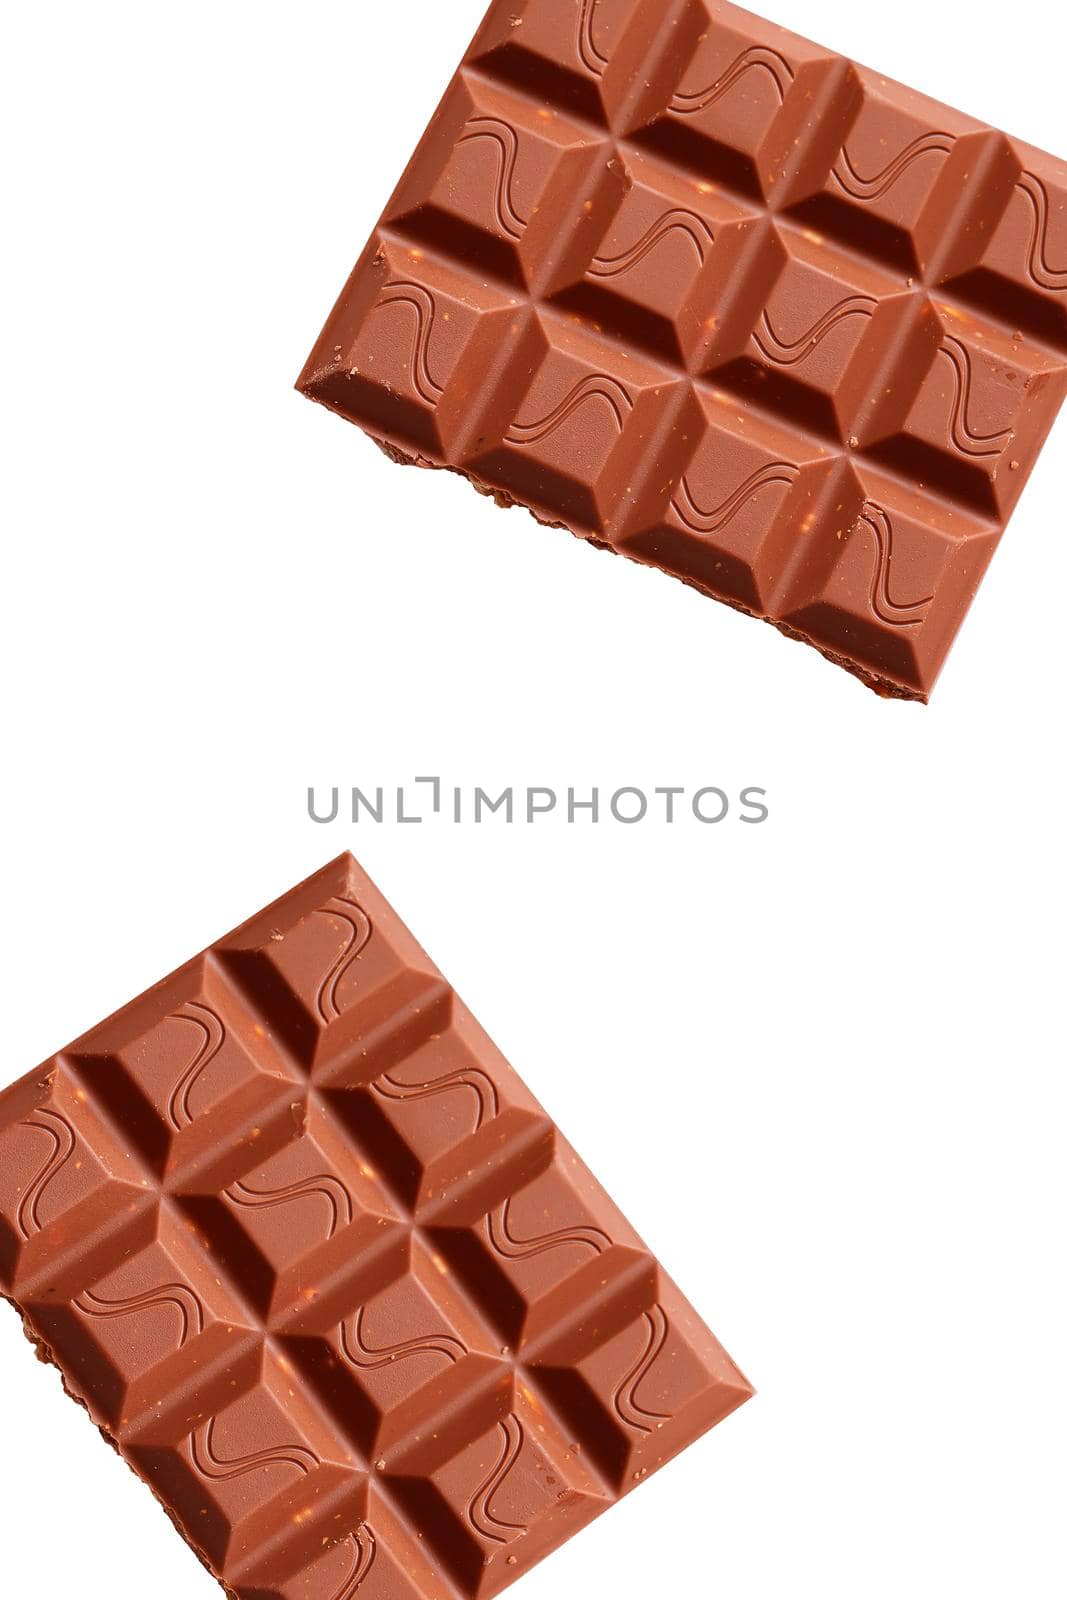 Broken piece of chocolate with crumbs on a white background. Cocoa Dessert